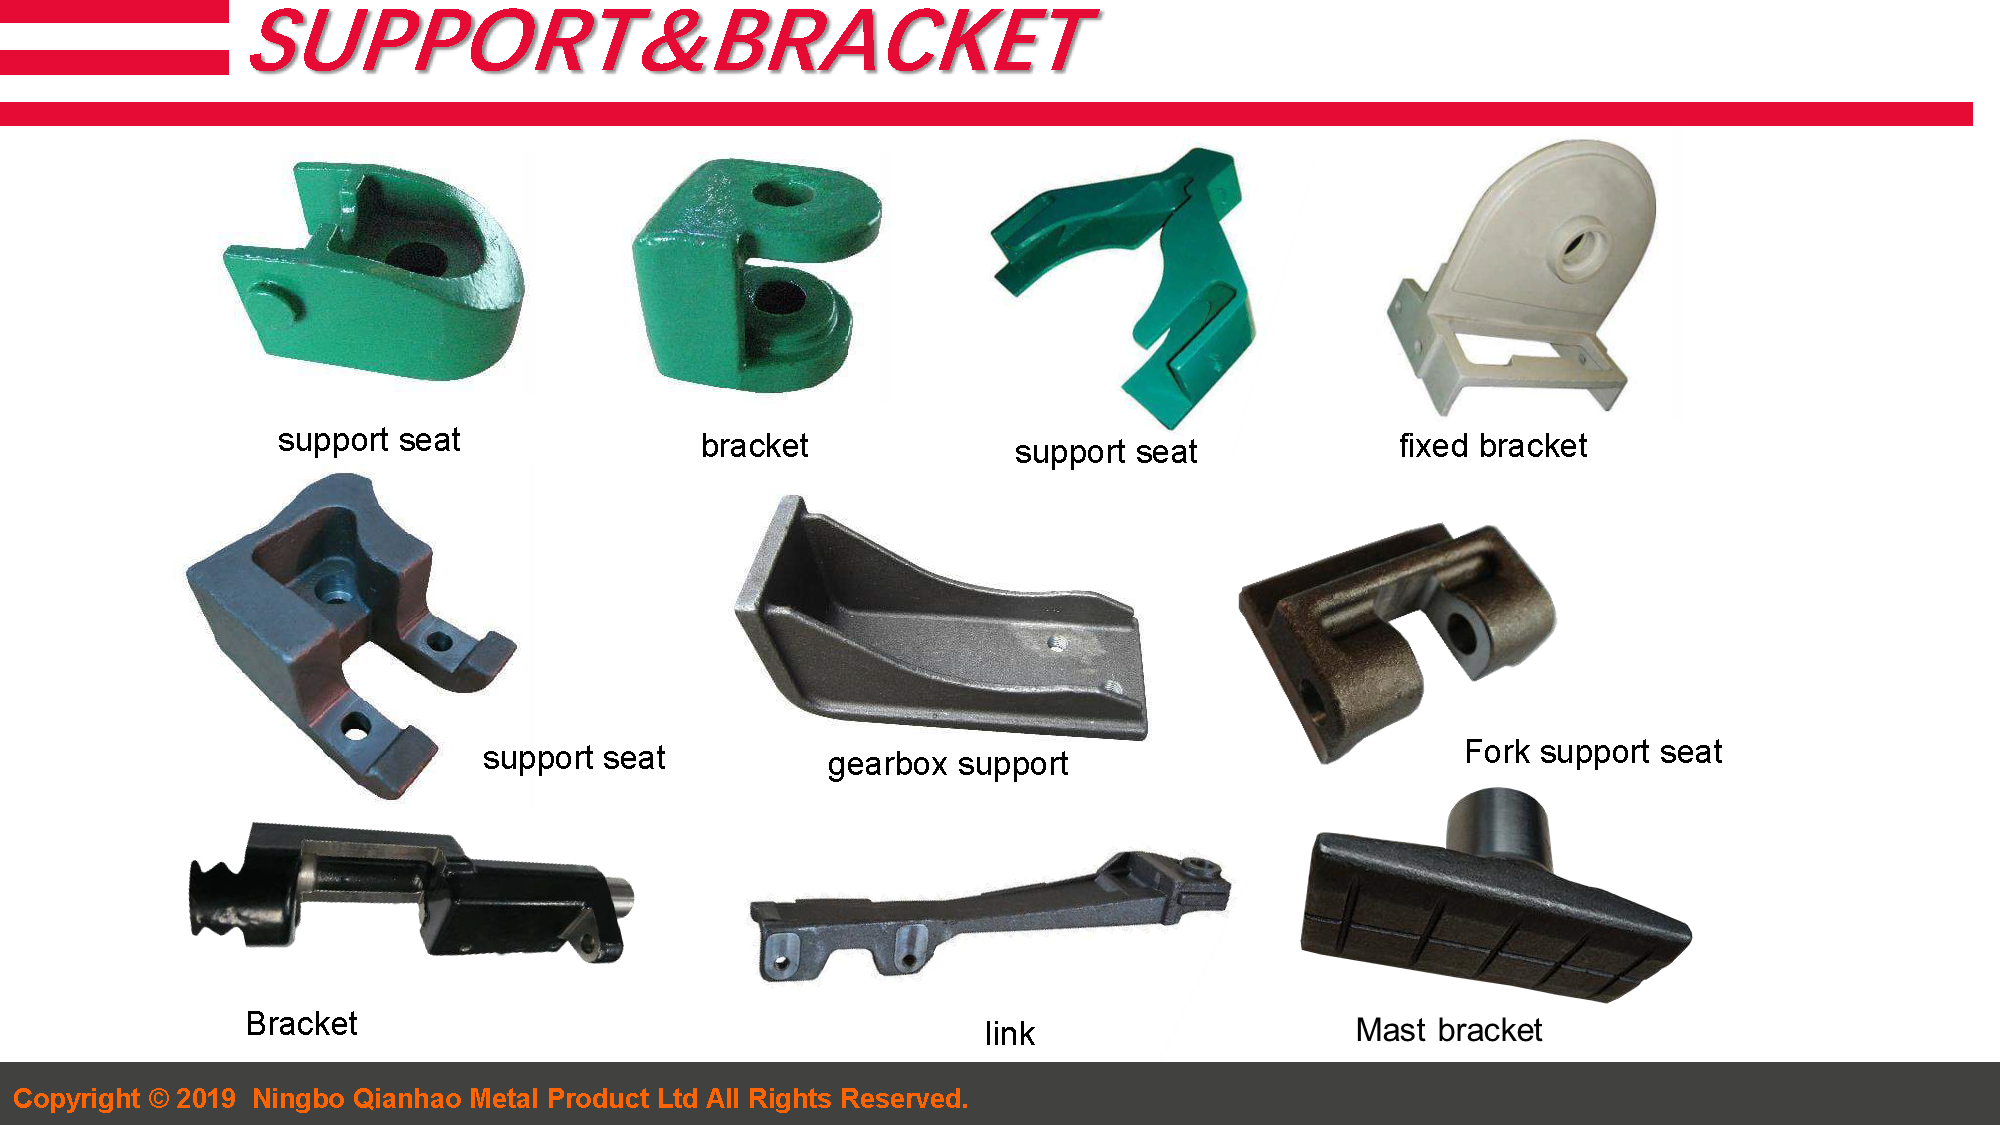 2.Forklift Components Capacity Introduction 19.4.9(图20)